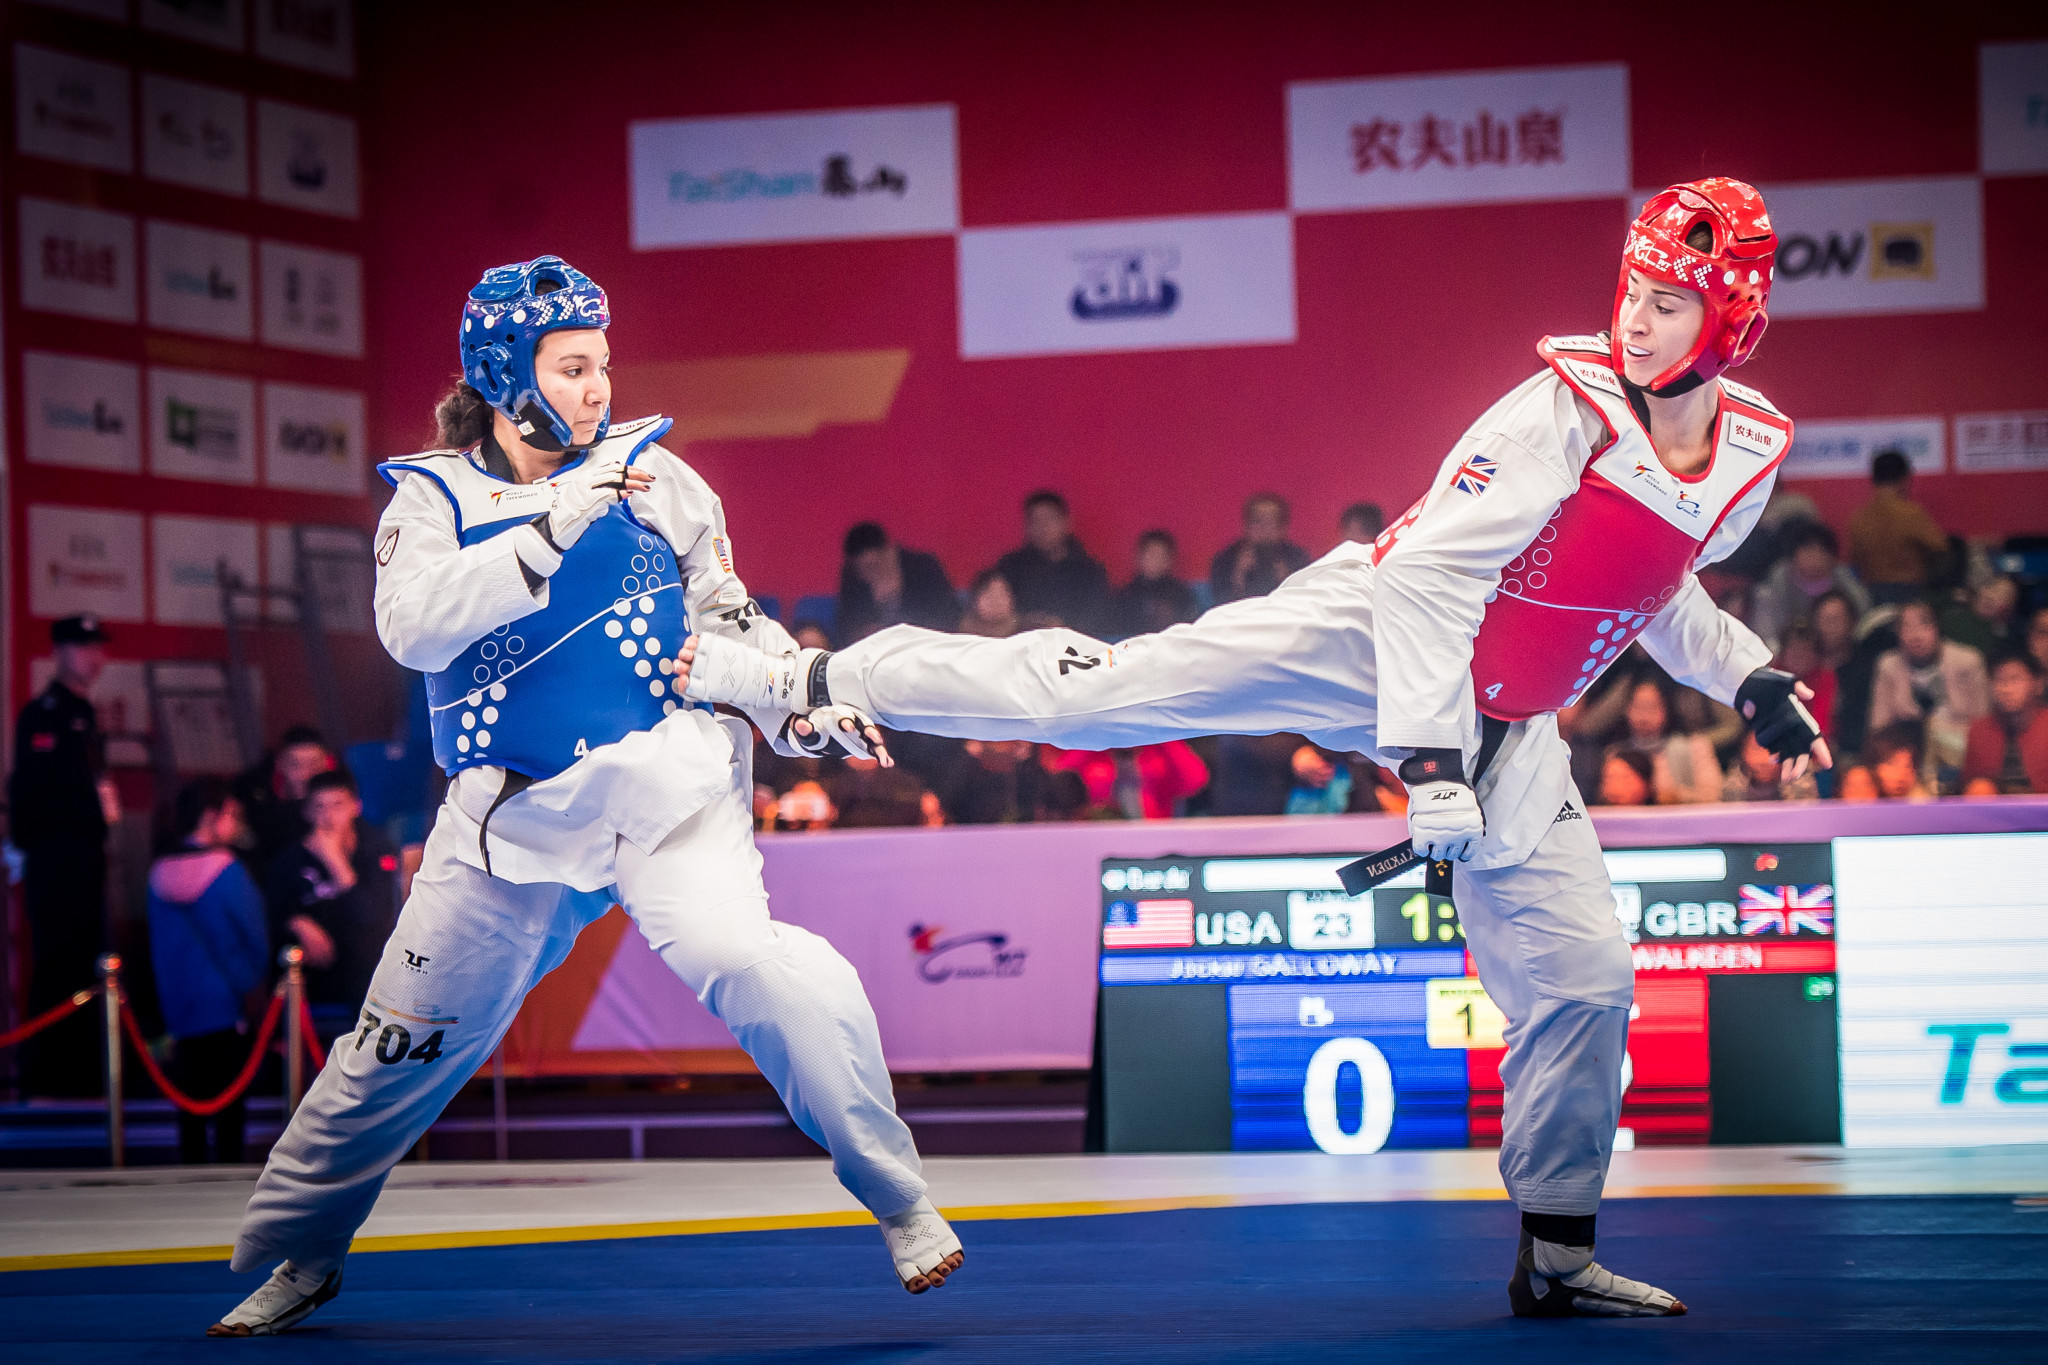 Walkden eased to a 10-2 victory over the United States’ Jackie Galloway in the women's over 67kg final ©World Taekwondo